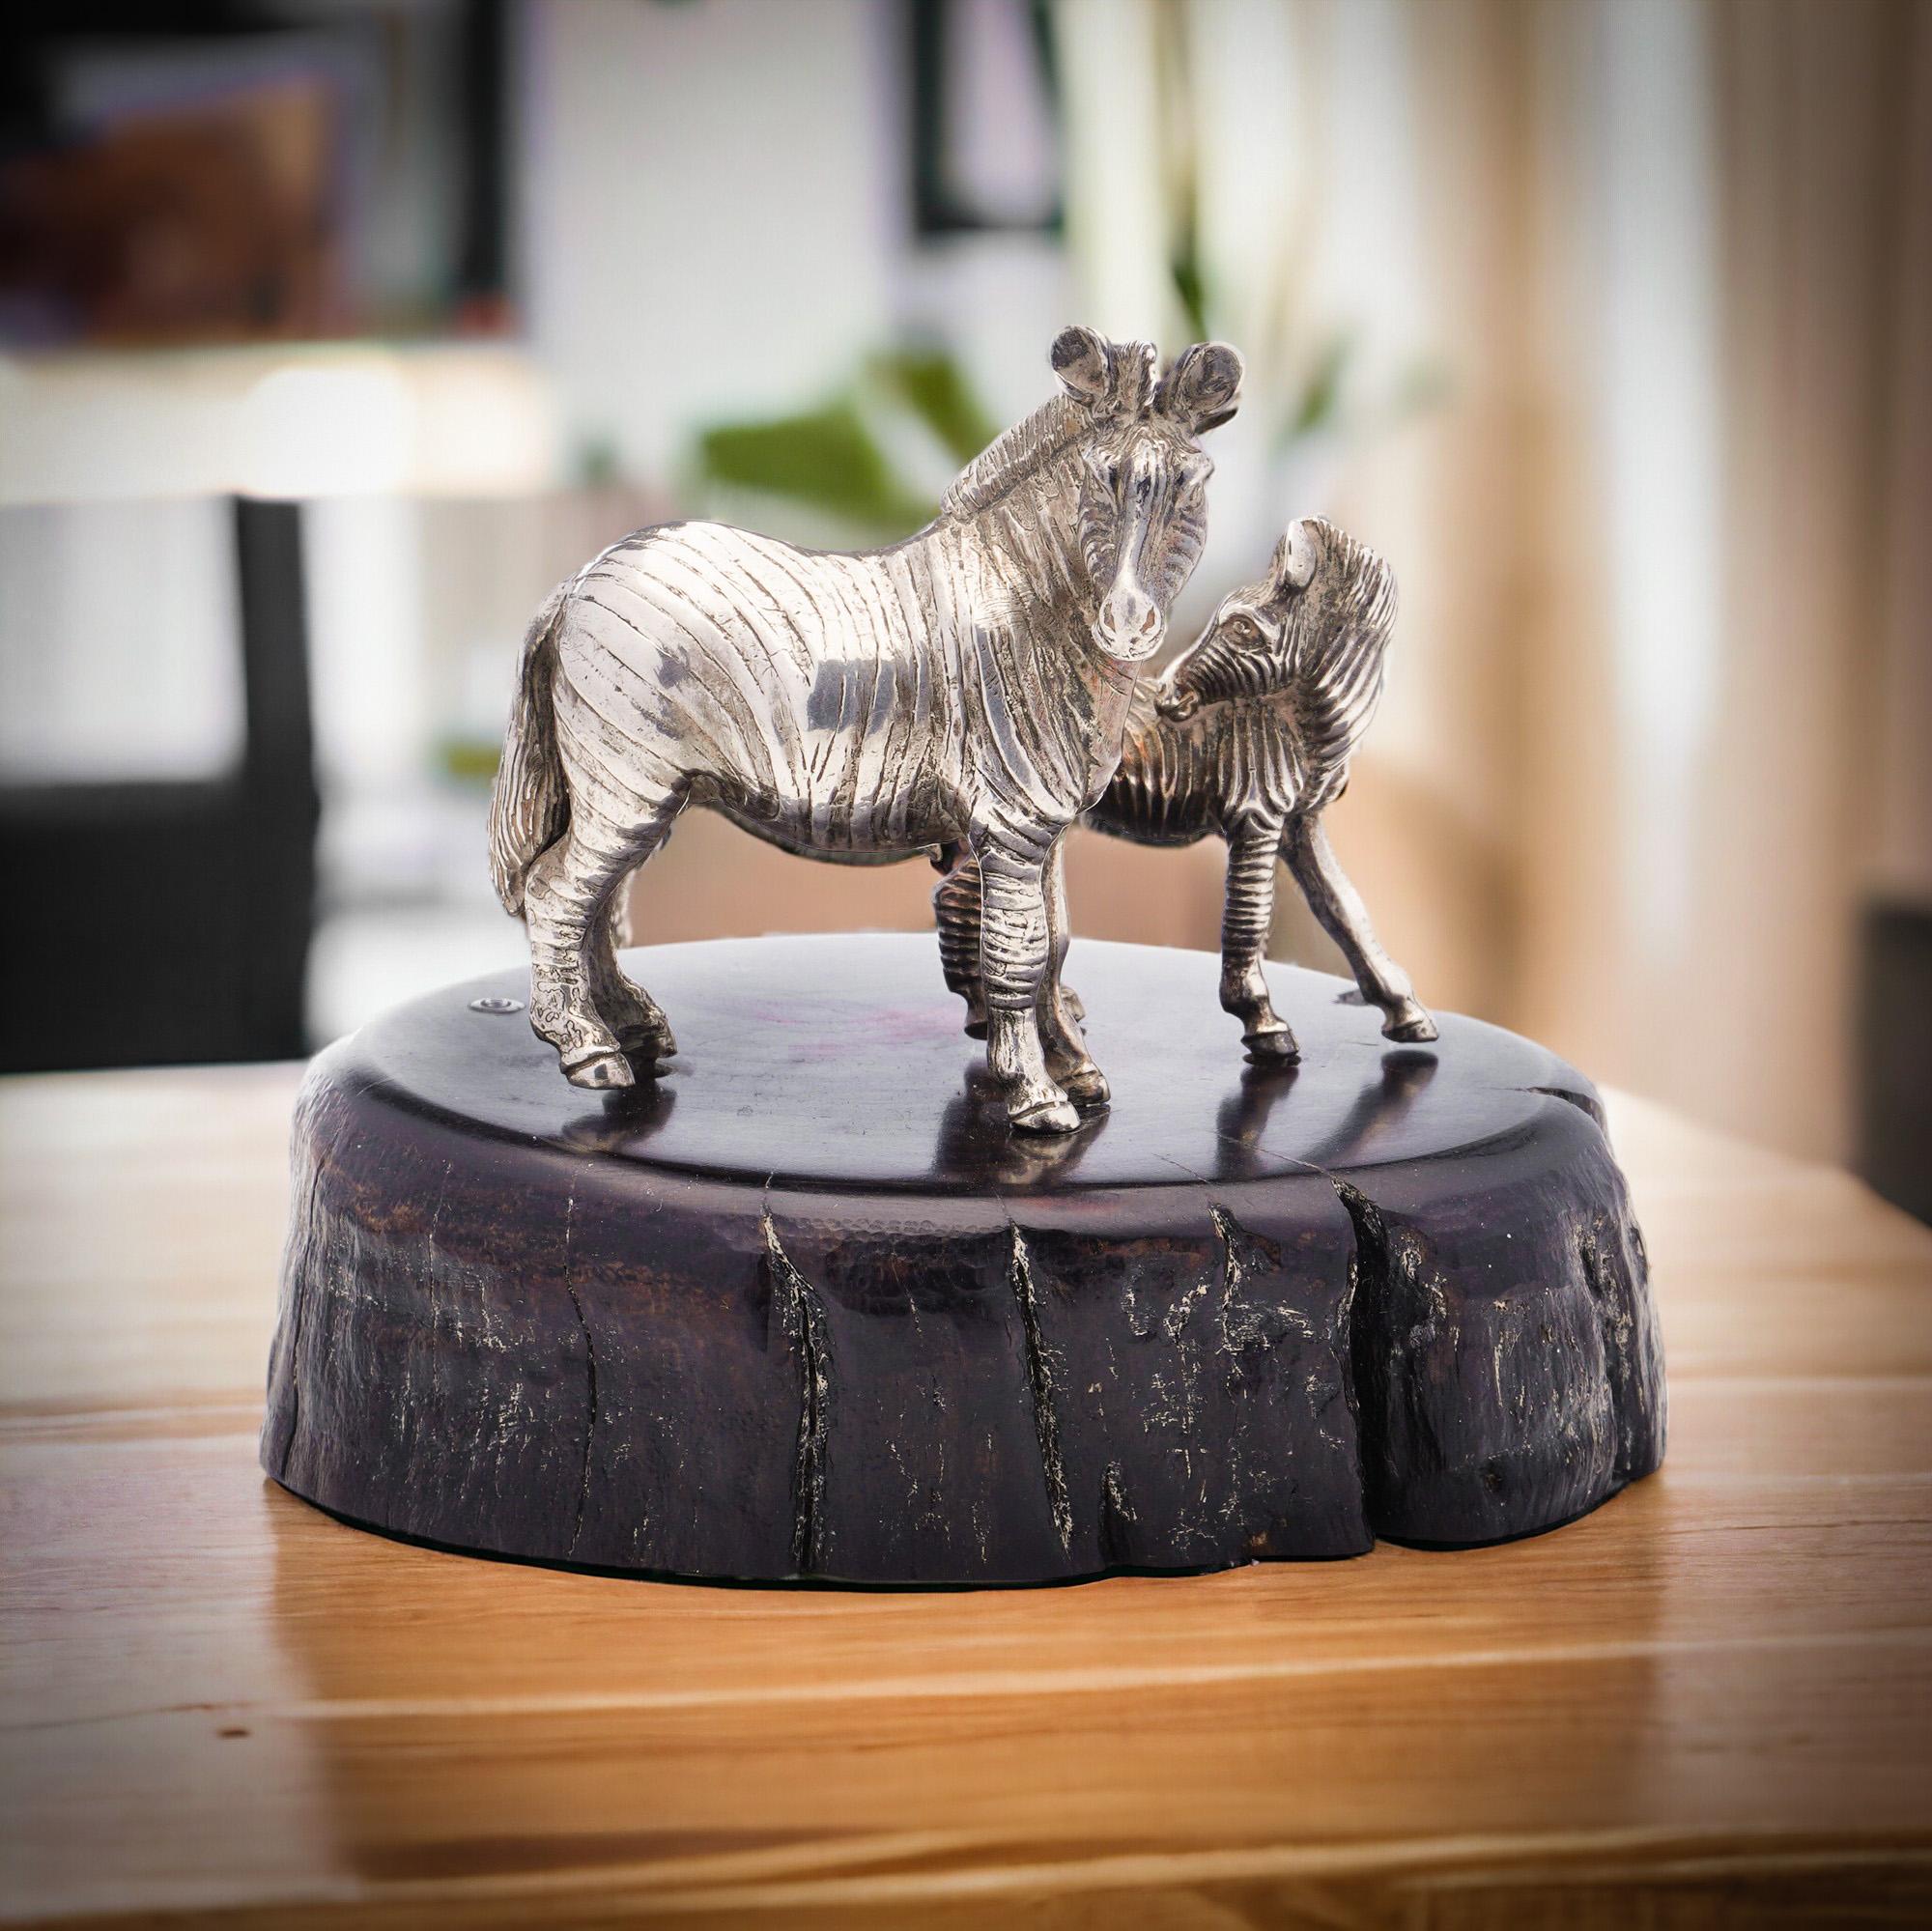 Patrick Mavros 925 sterling silver Zebra and Foal figurine, beautifully crafted and mounted on a stunning blackwood base.
Made in Africa, Zimbabwe, circa 1990s.
Hallmarked with PM mark, Sable antelope head hallmark. 

This unique piece is a